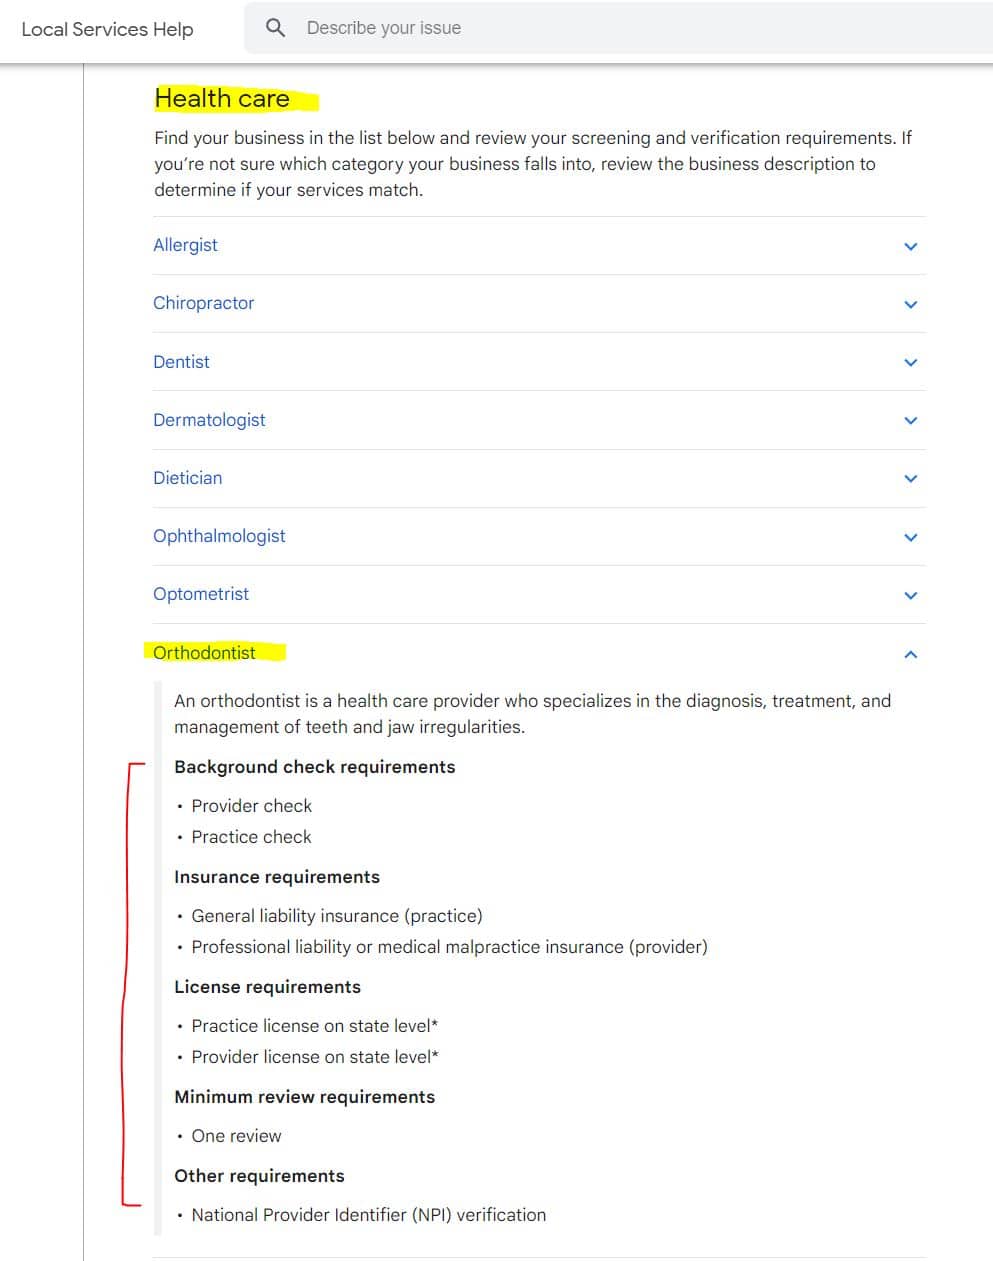 Google Guaranteed requirements for Orthodontists provided as an example from Google's website